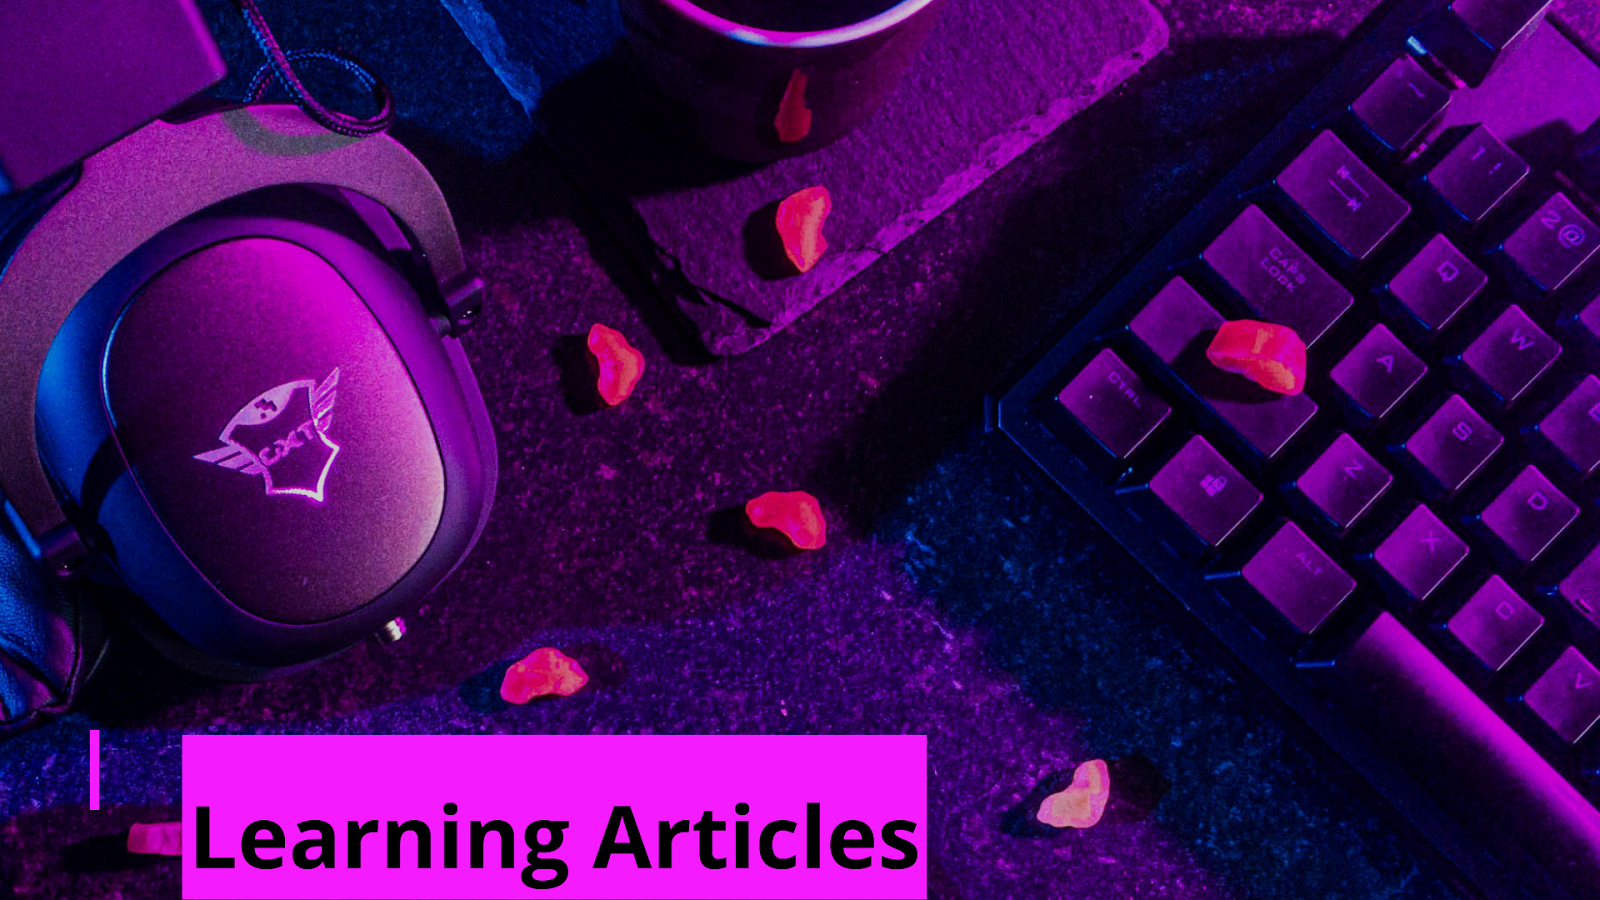 Learning articles